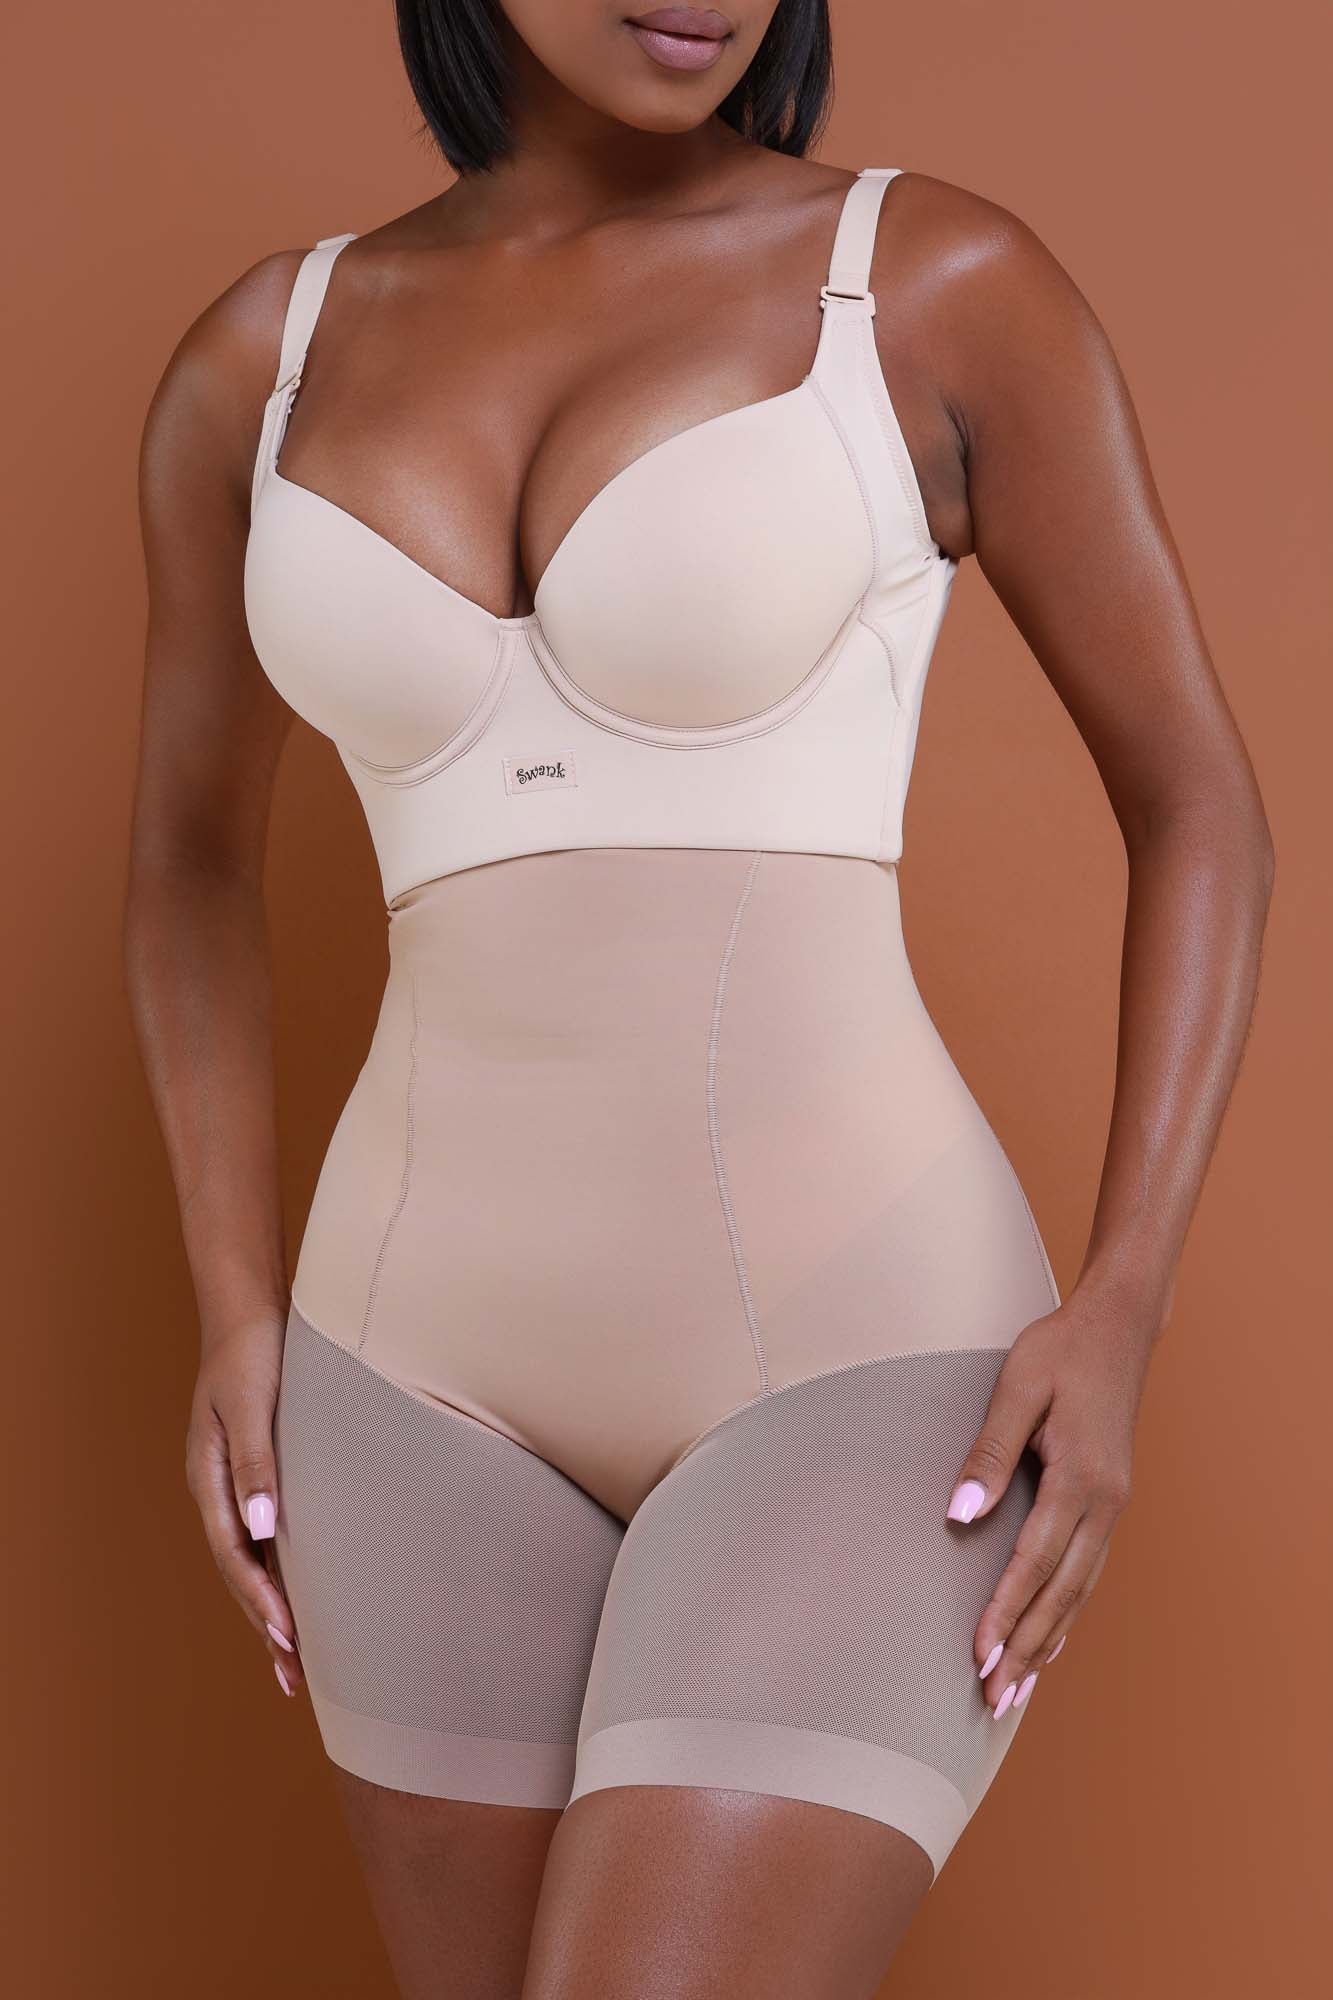 $14.99 for a Nude Body Contour Shapewear Seamless Full-Body Control Suit  ($50 List Price). Available in M, L, or XL.